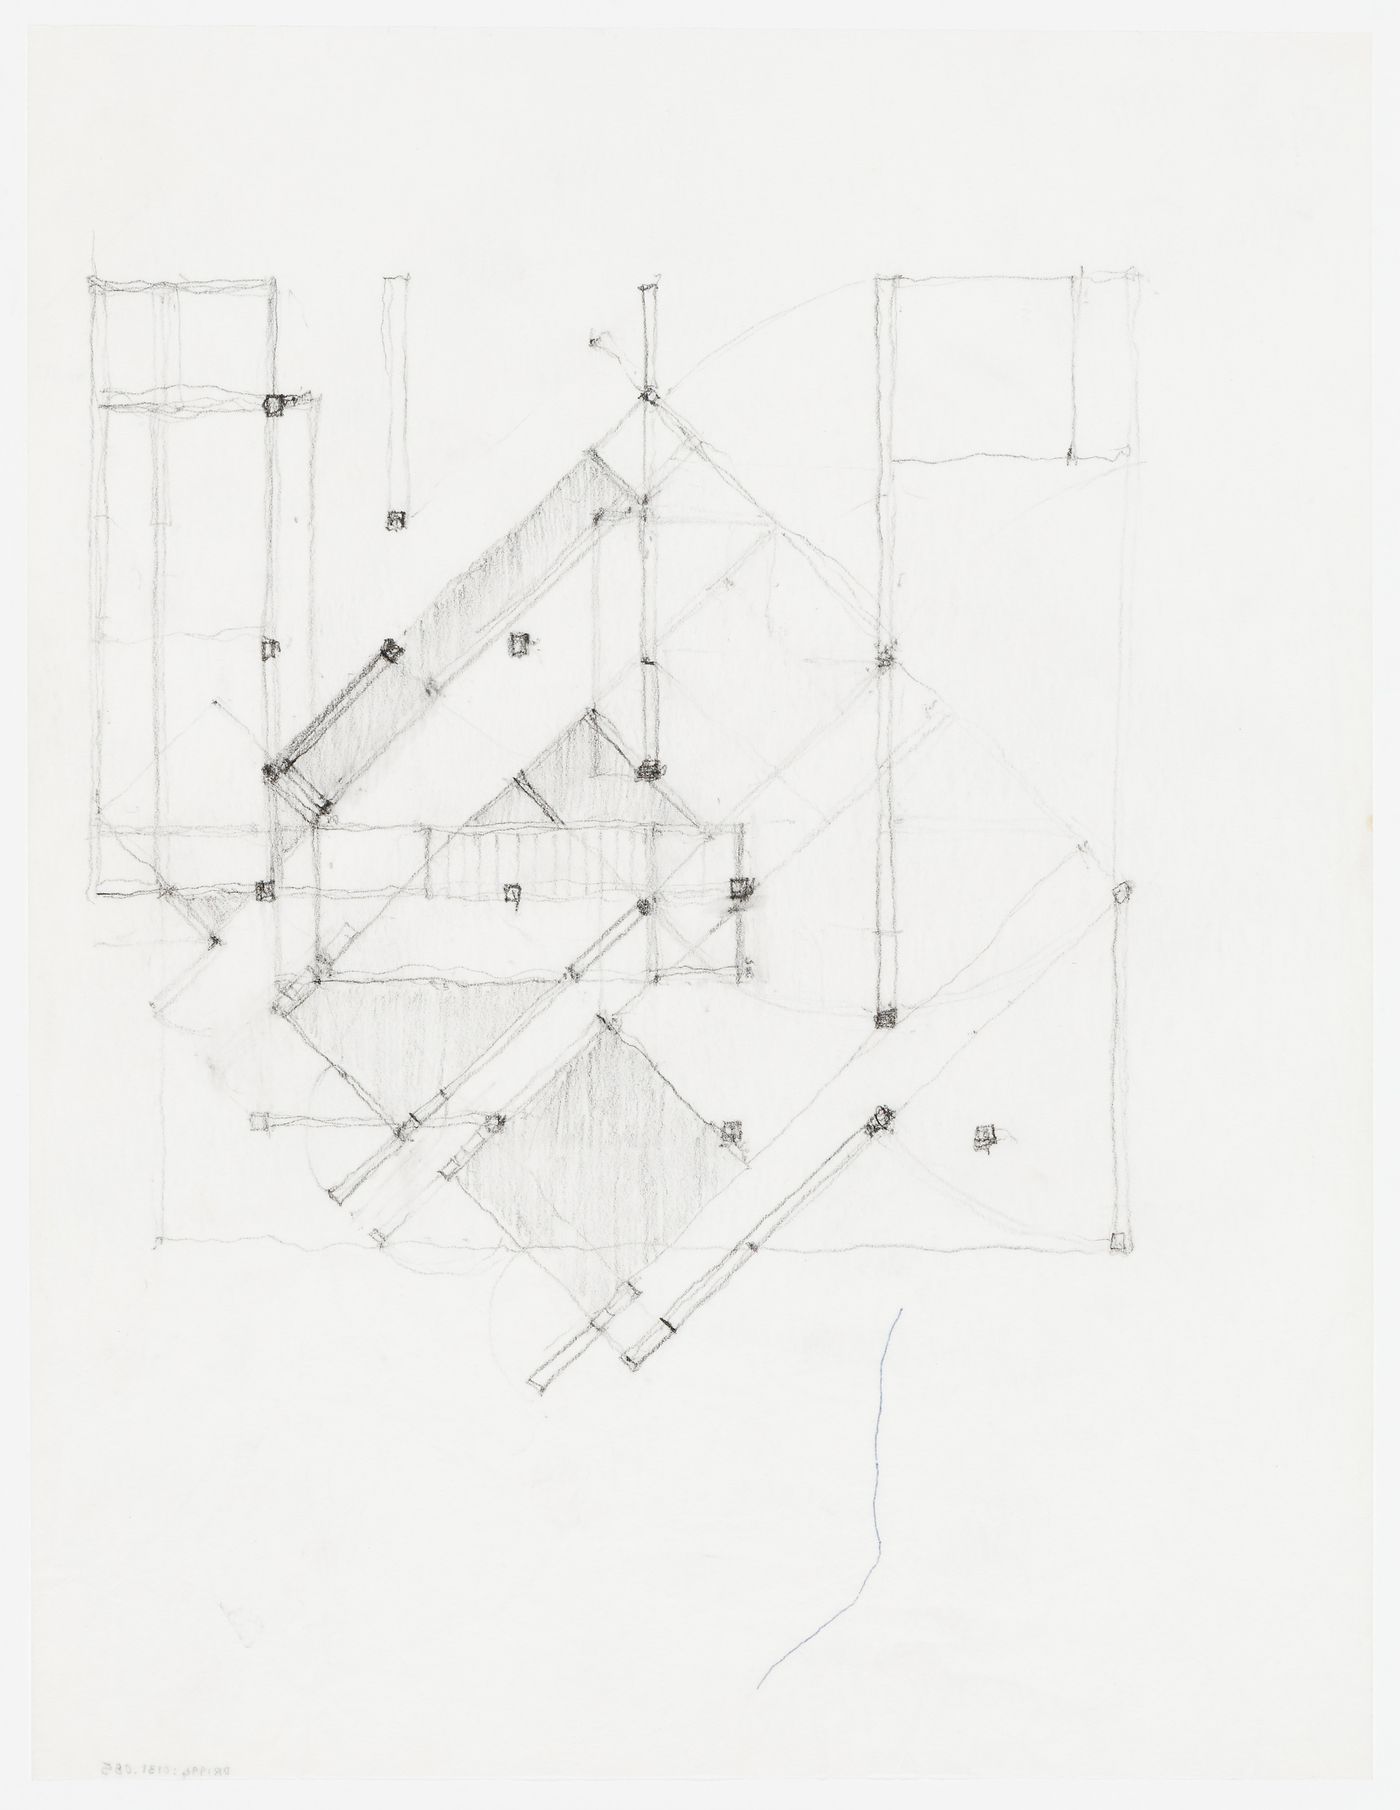 House III (Miller House), Lakeville, Connecticut: plan